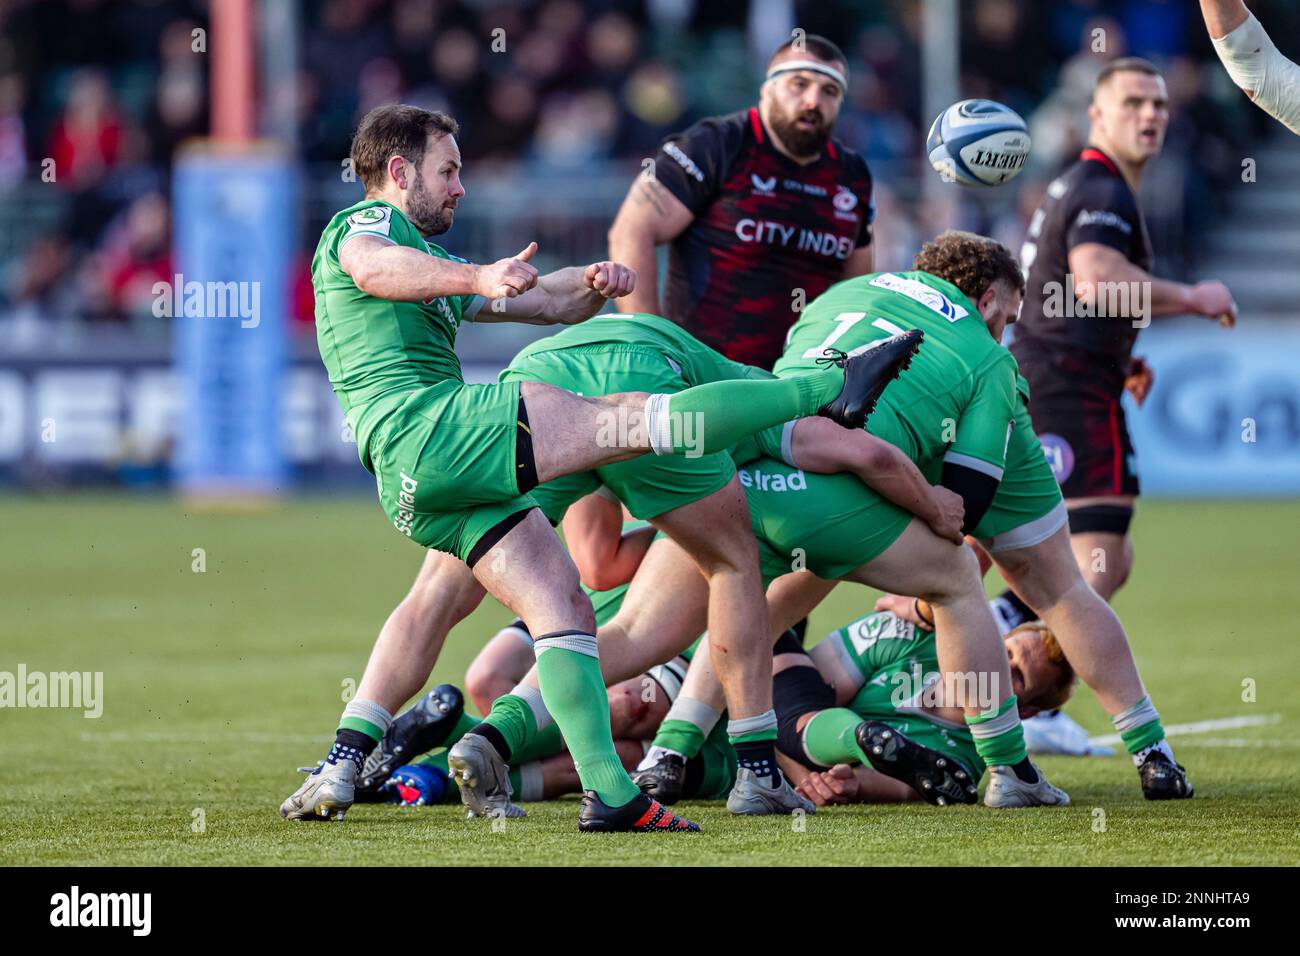 LONDON, UNITED KINGDOM. 25th, Feb 2023. Michael Young Newcastle Falcons (Capt.) in action during Gallagher Premiership Rugby Match between Saracens vs Newcastle Falcons at StoneX Stadium on Saturday, 25 February 2023. LONDON ENGLAND.  Credit: Taka G Wu/Alamy Live News Stock Photo